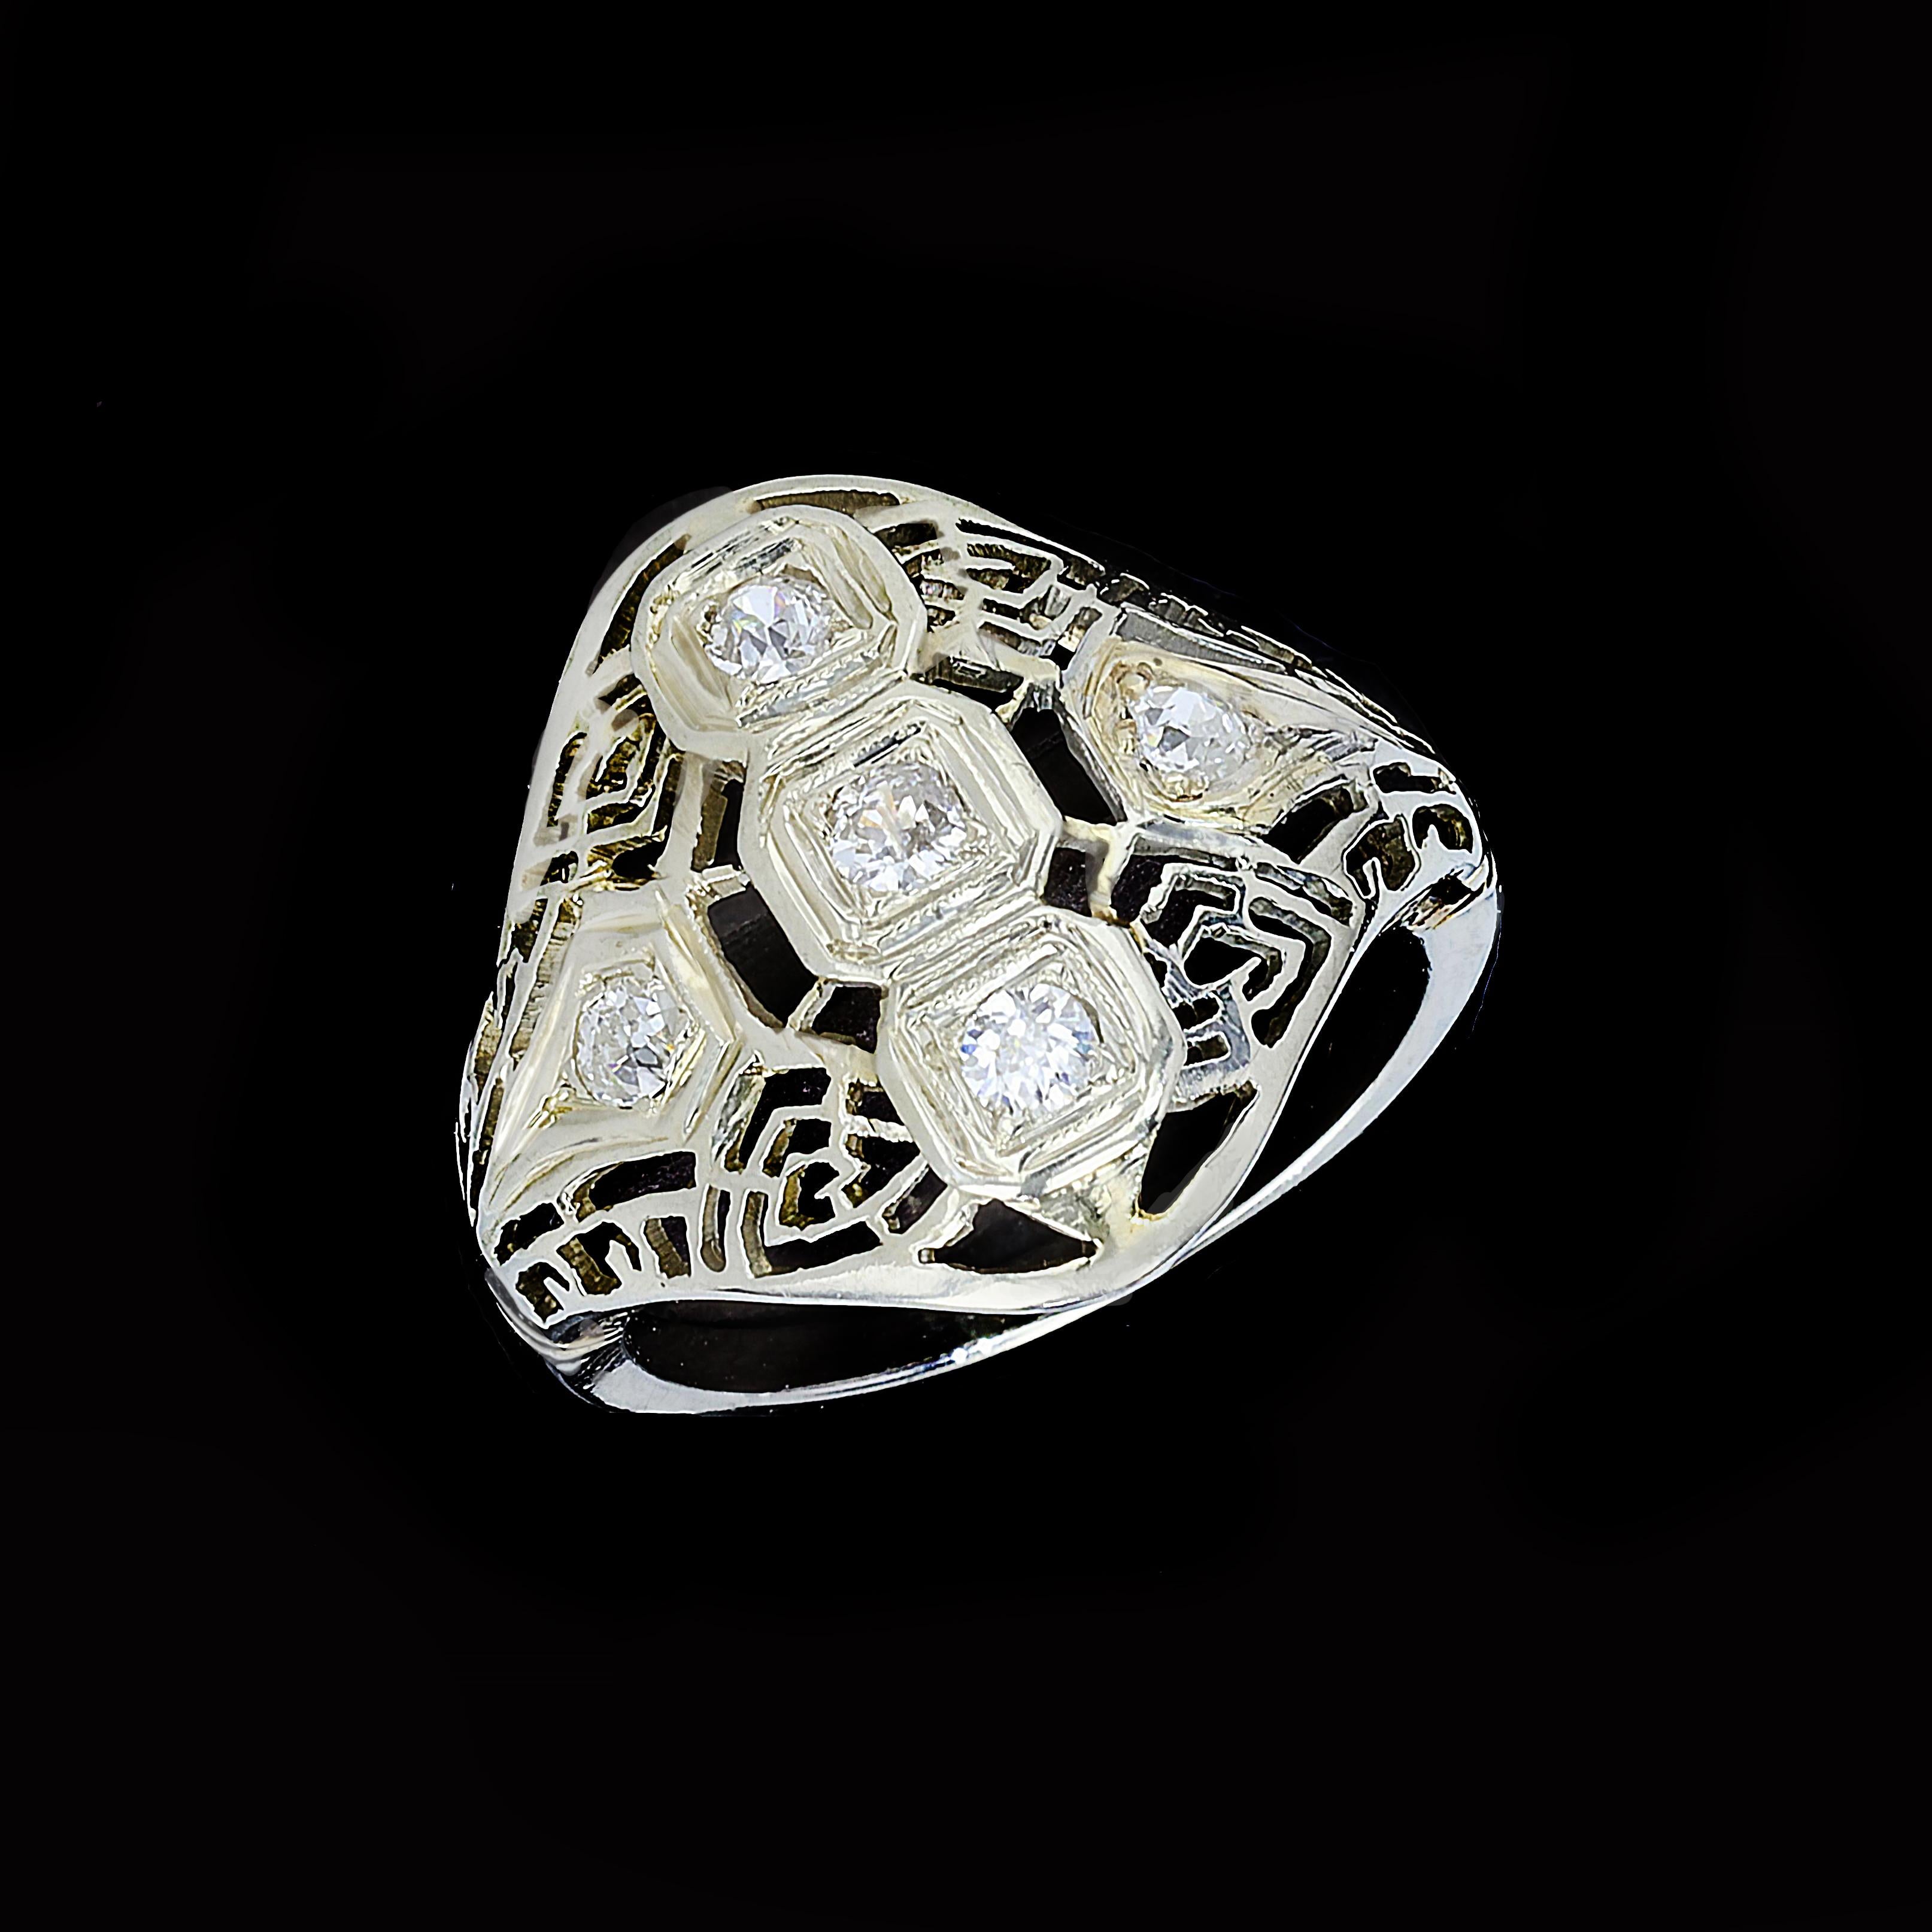 Beautifully intricate open framework in 14K white gold provides a gorgeous base for five old mine cut diamonds in this breathtaking Edwardian ring. The old mine cut diamonds weigh approximately 0.25ct. with a color of H and VS2 clarity. The ring